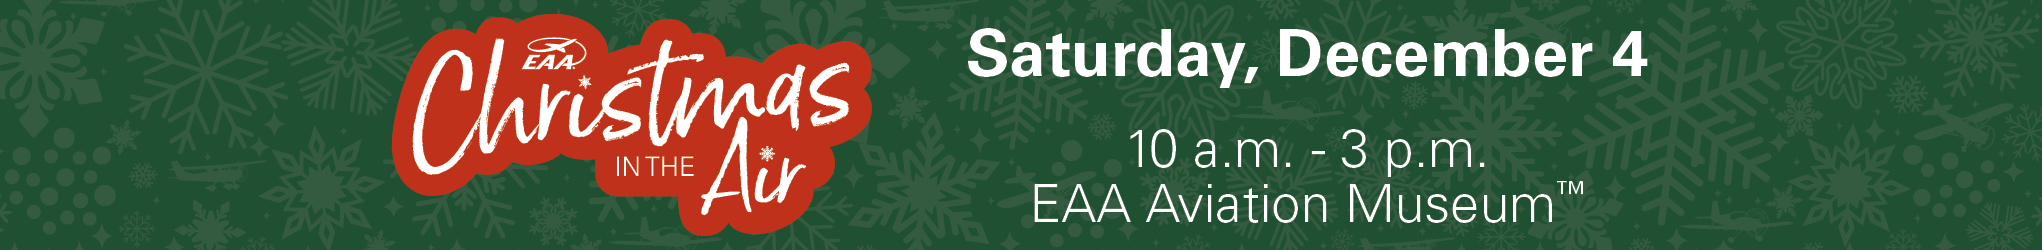 Christmas in the Air at the EAA Aviation Museum on December 4, 2021